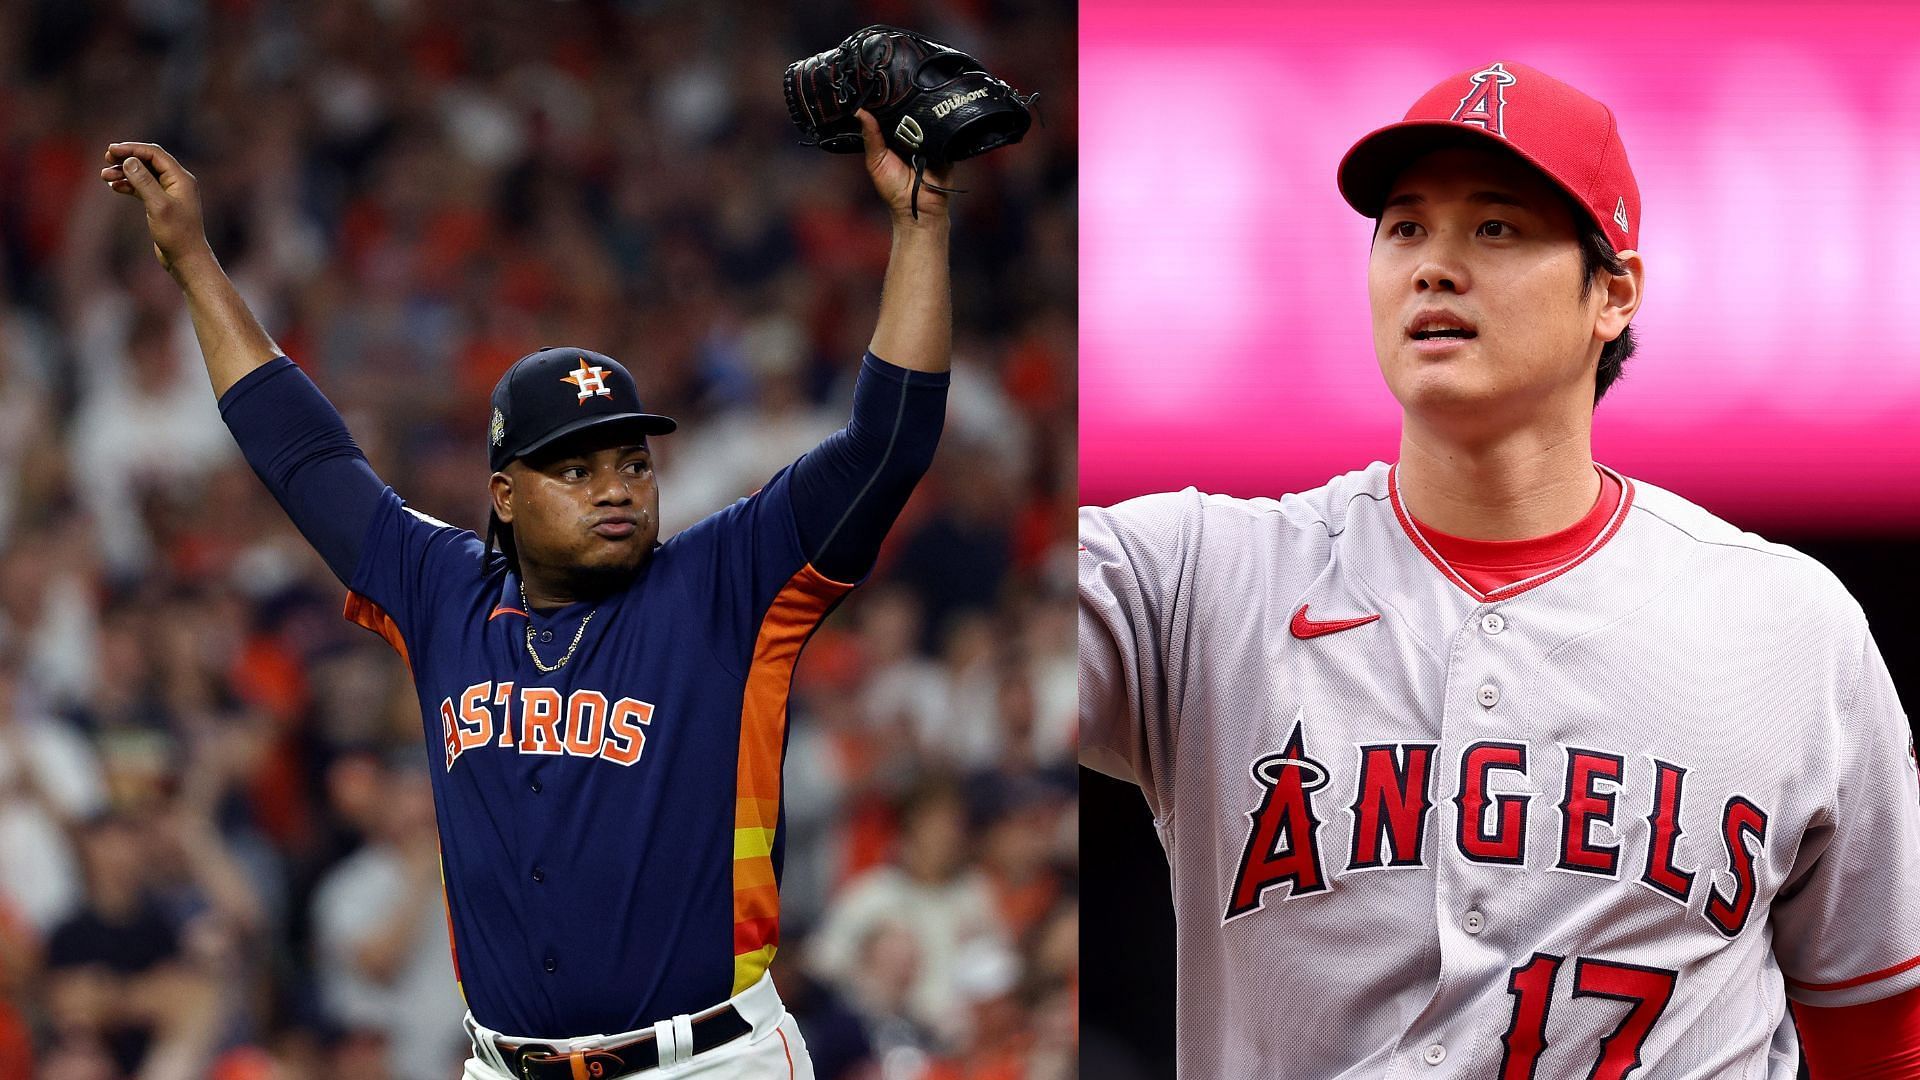 Framber Valdez had some kind words for Shohei Ohtani after the Astros beat the Angels